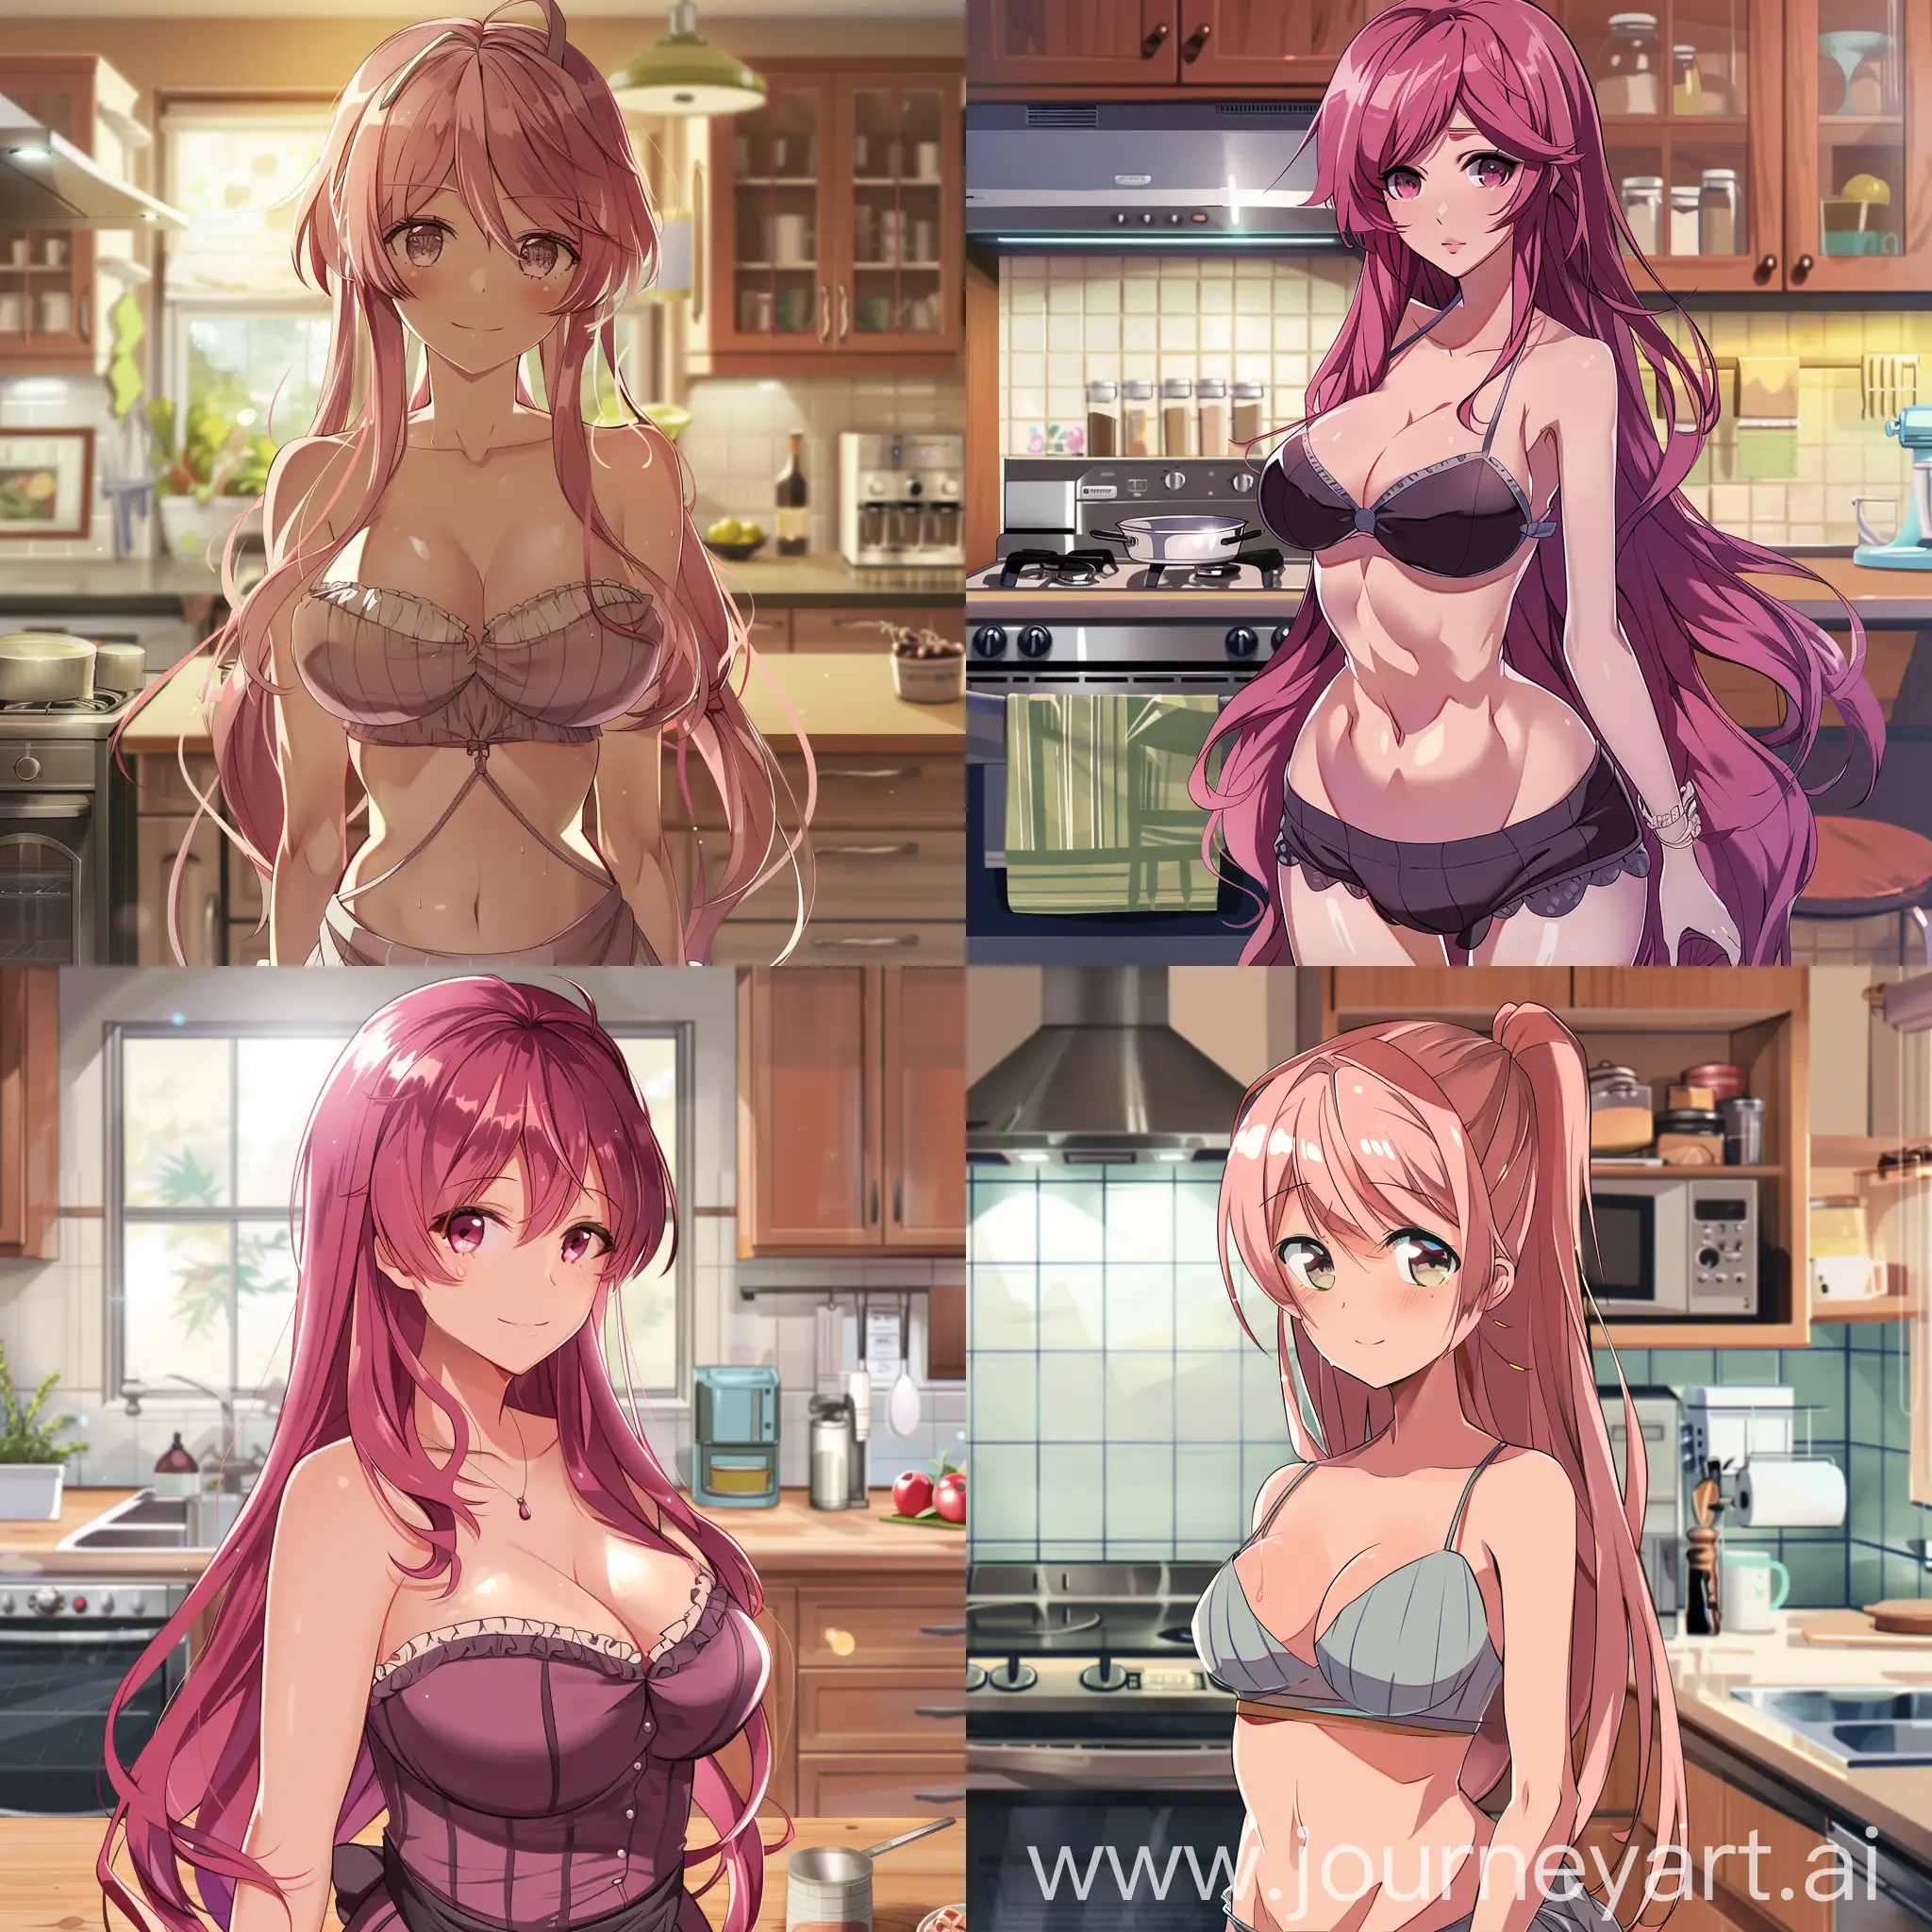 A young woman with a busty figure, long pink hair, looks motherly, in a kitchen background, anime style 